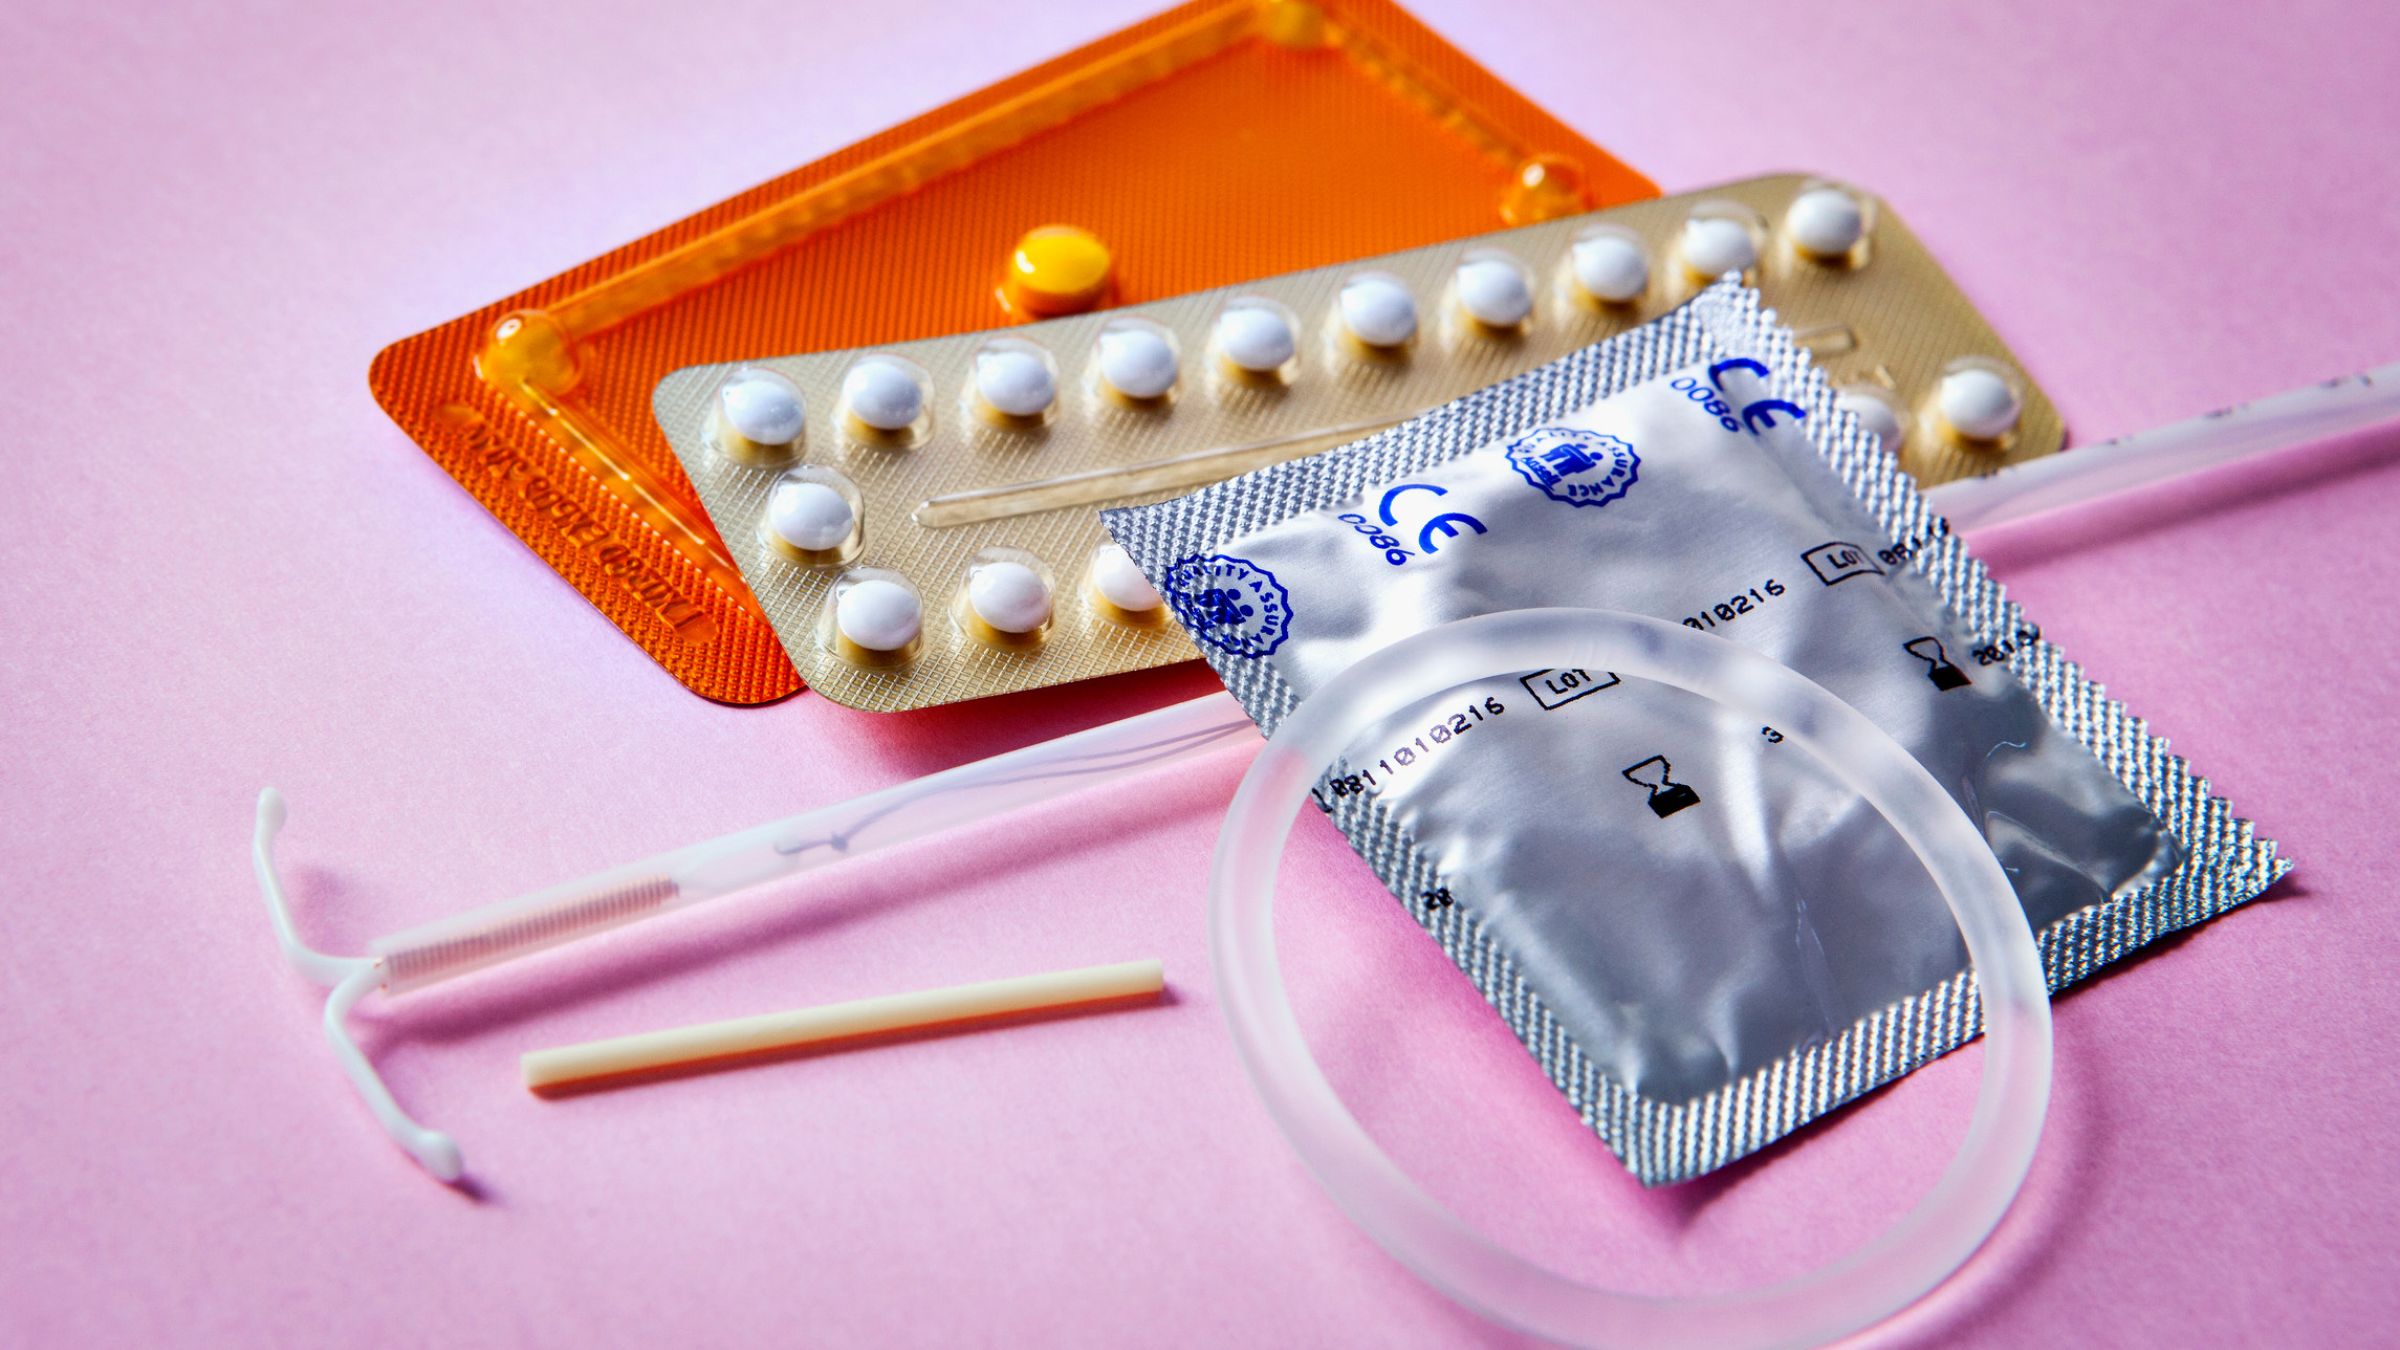 Hormonal birth control for athletes